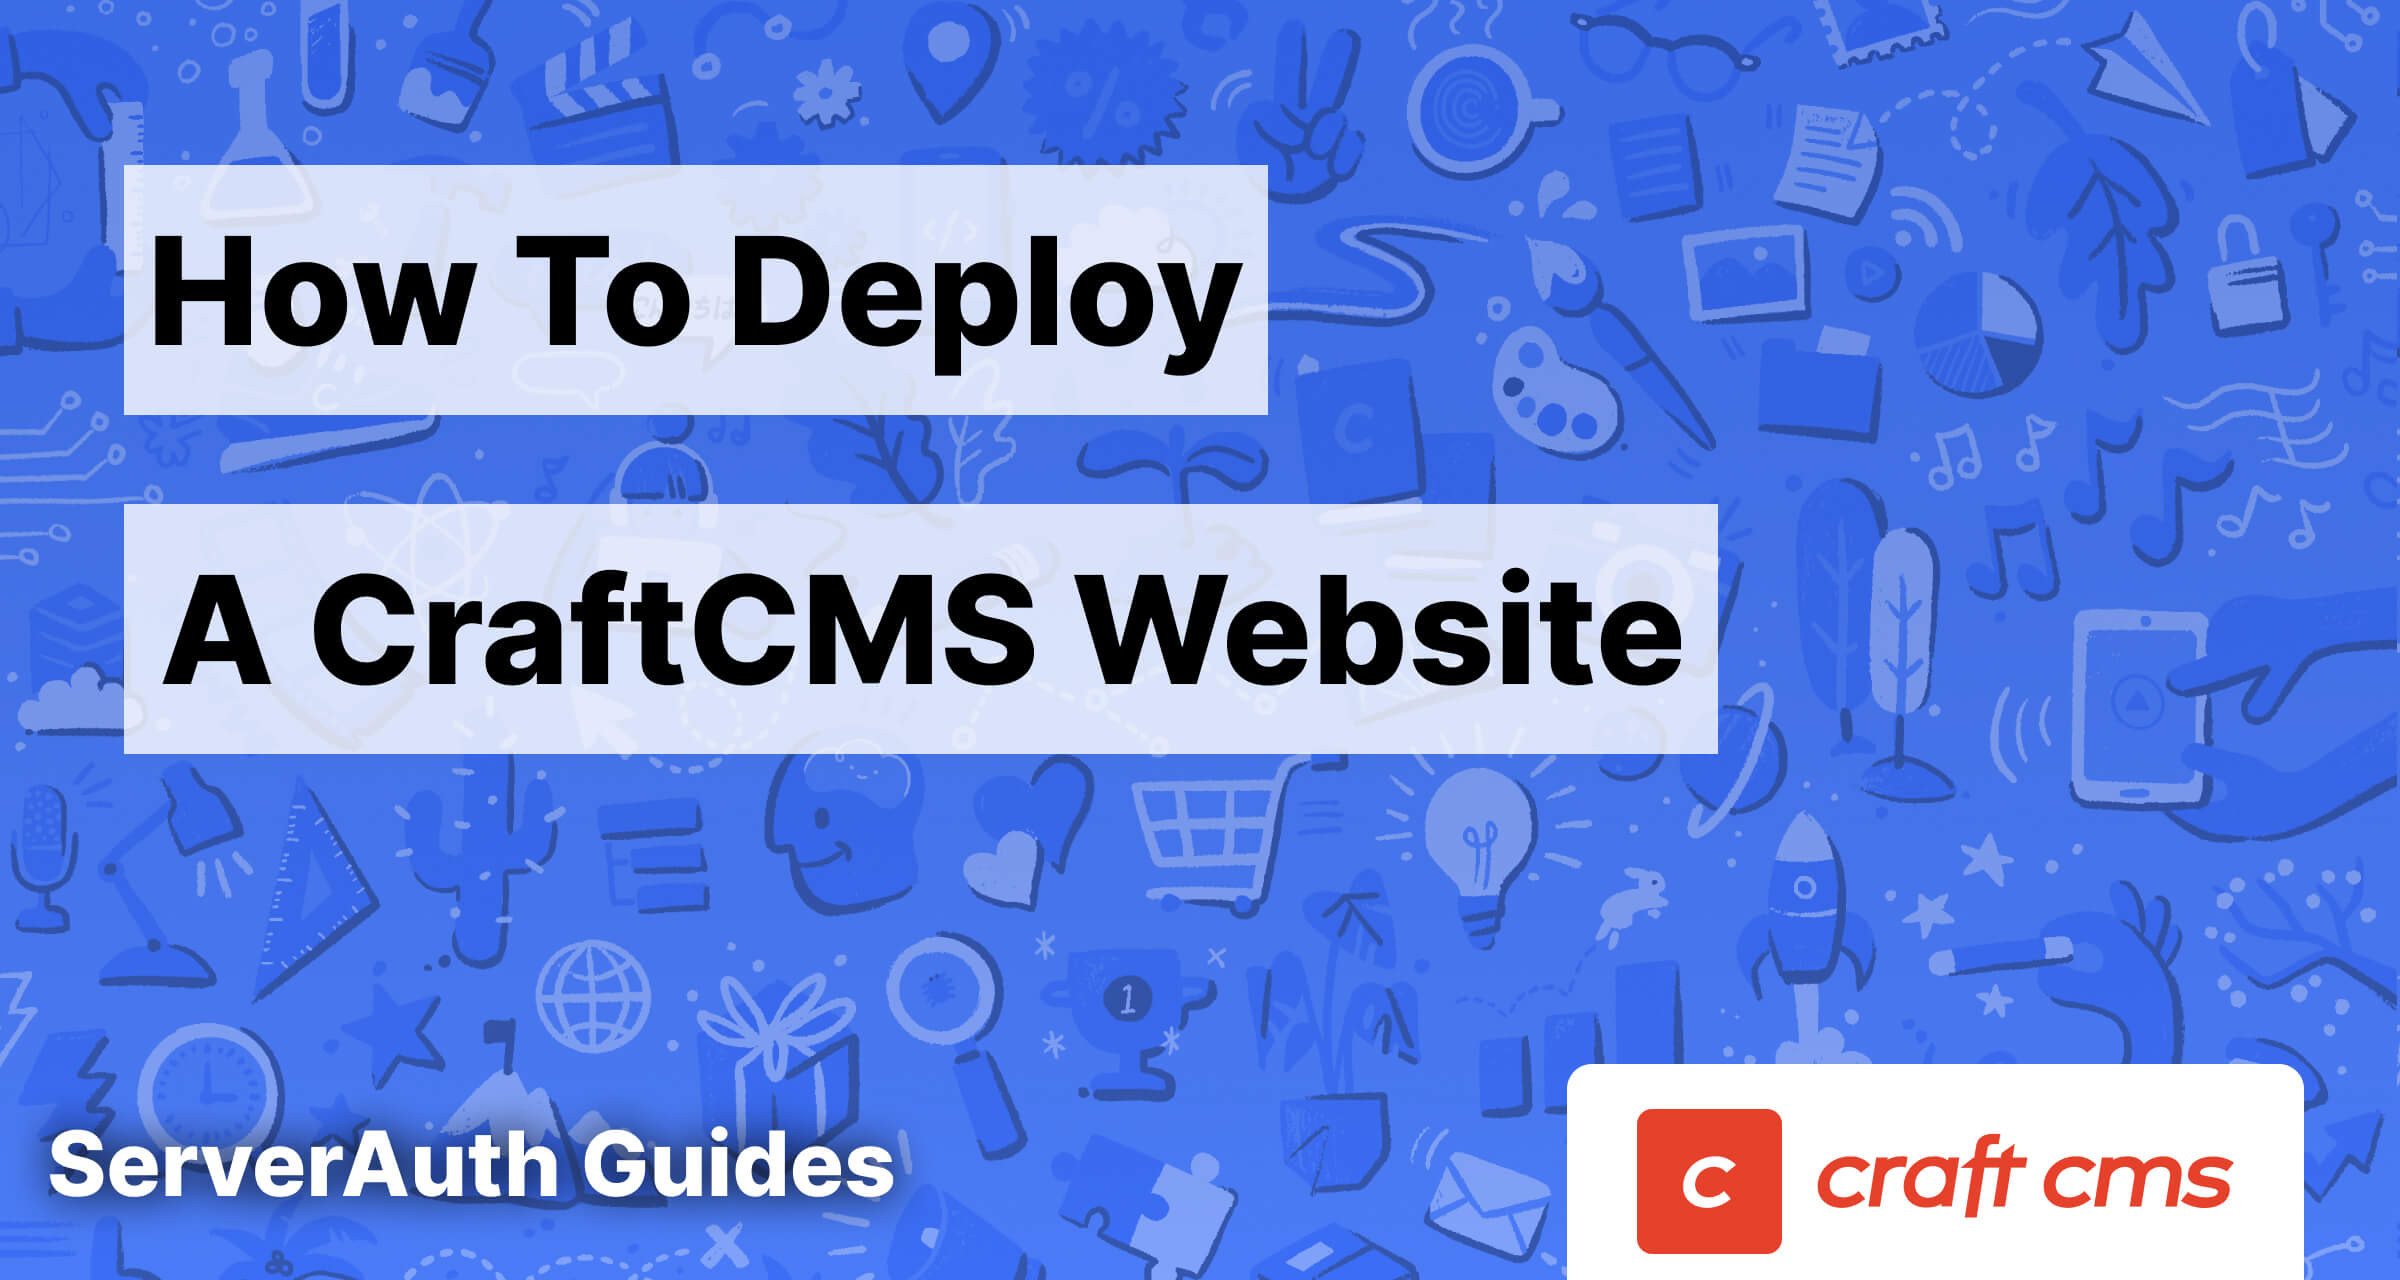 Deploying CraftCMS to your servers with ServerAuth